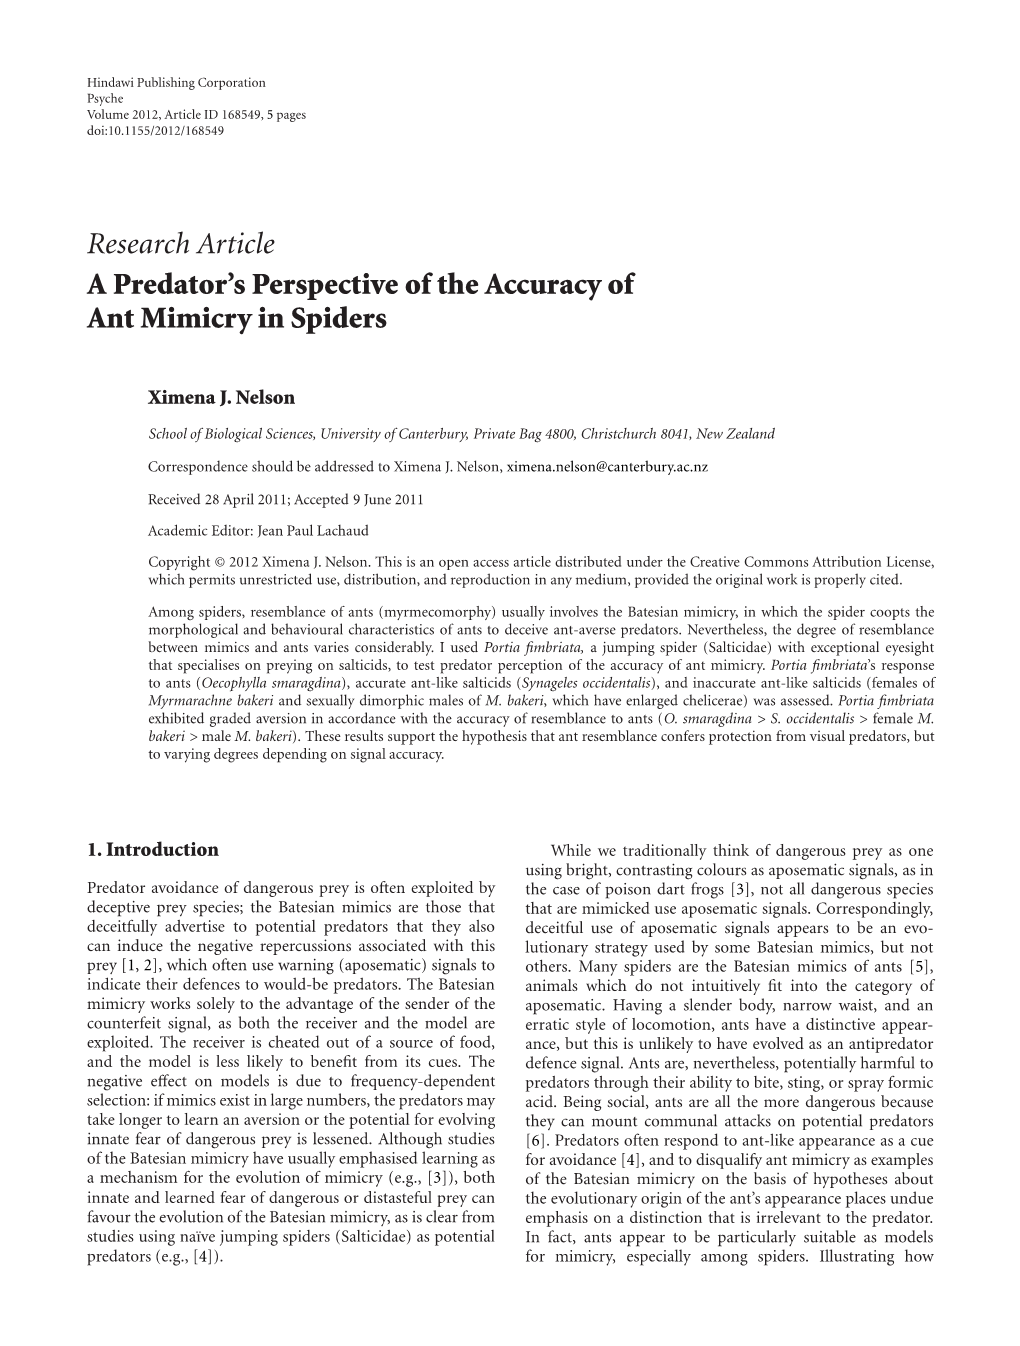 A Predator's Perspective of the Accuracy of Ant Mimicry in Spiders